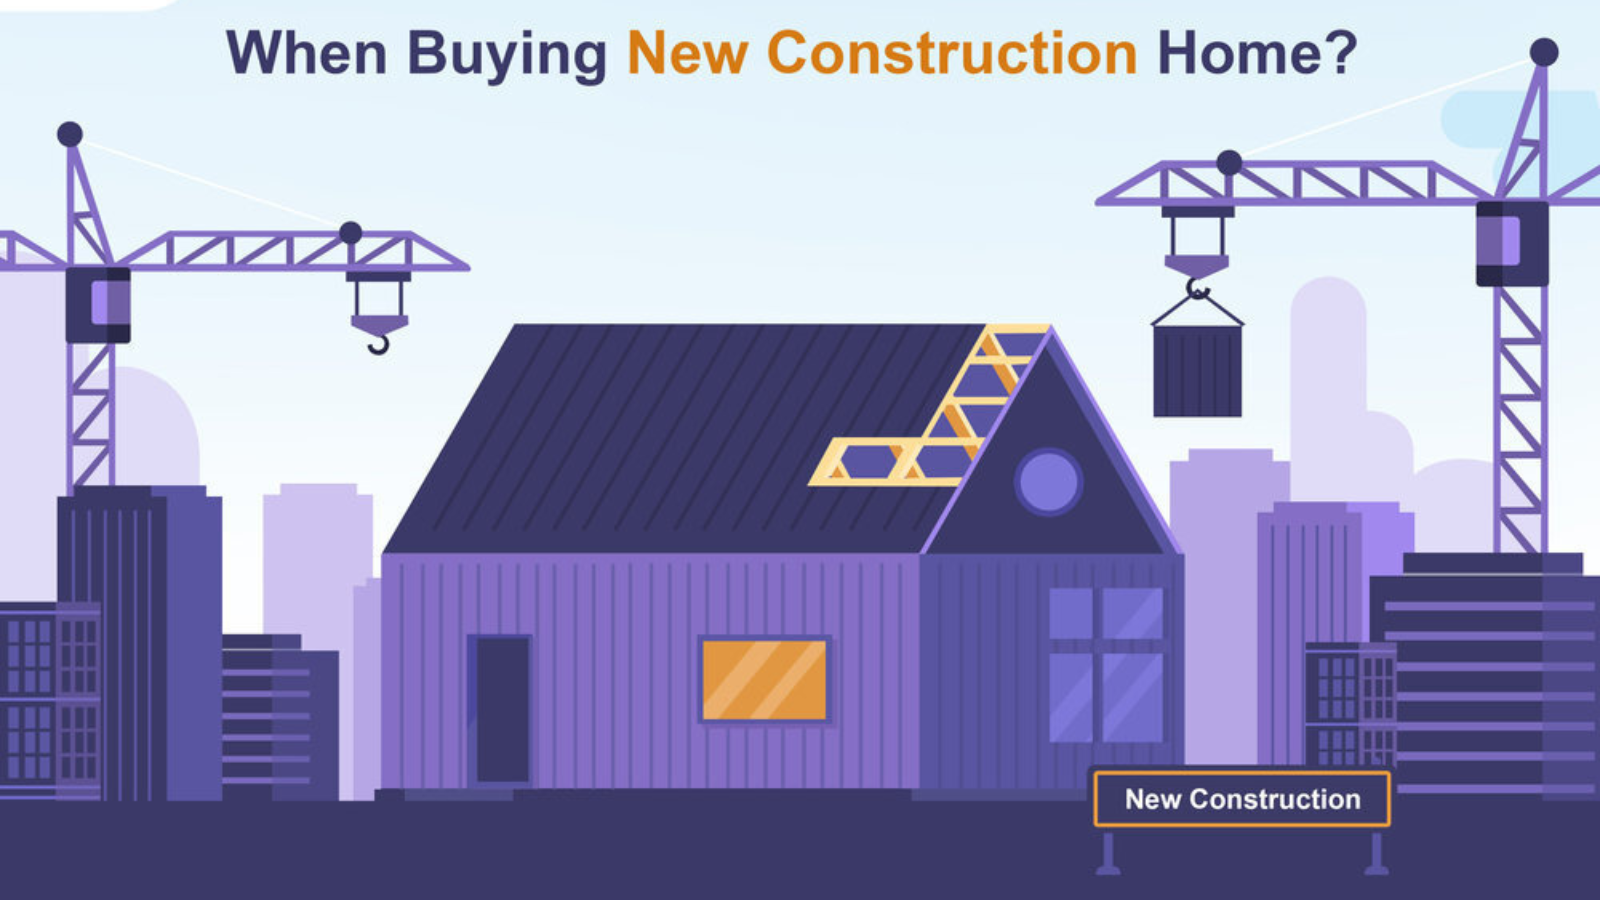 Should You Hire A Realtor When Buying New Construction Home?